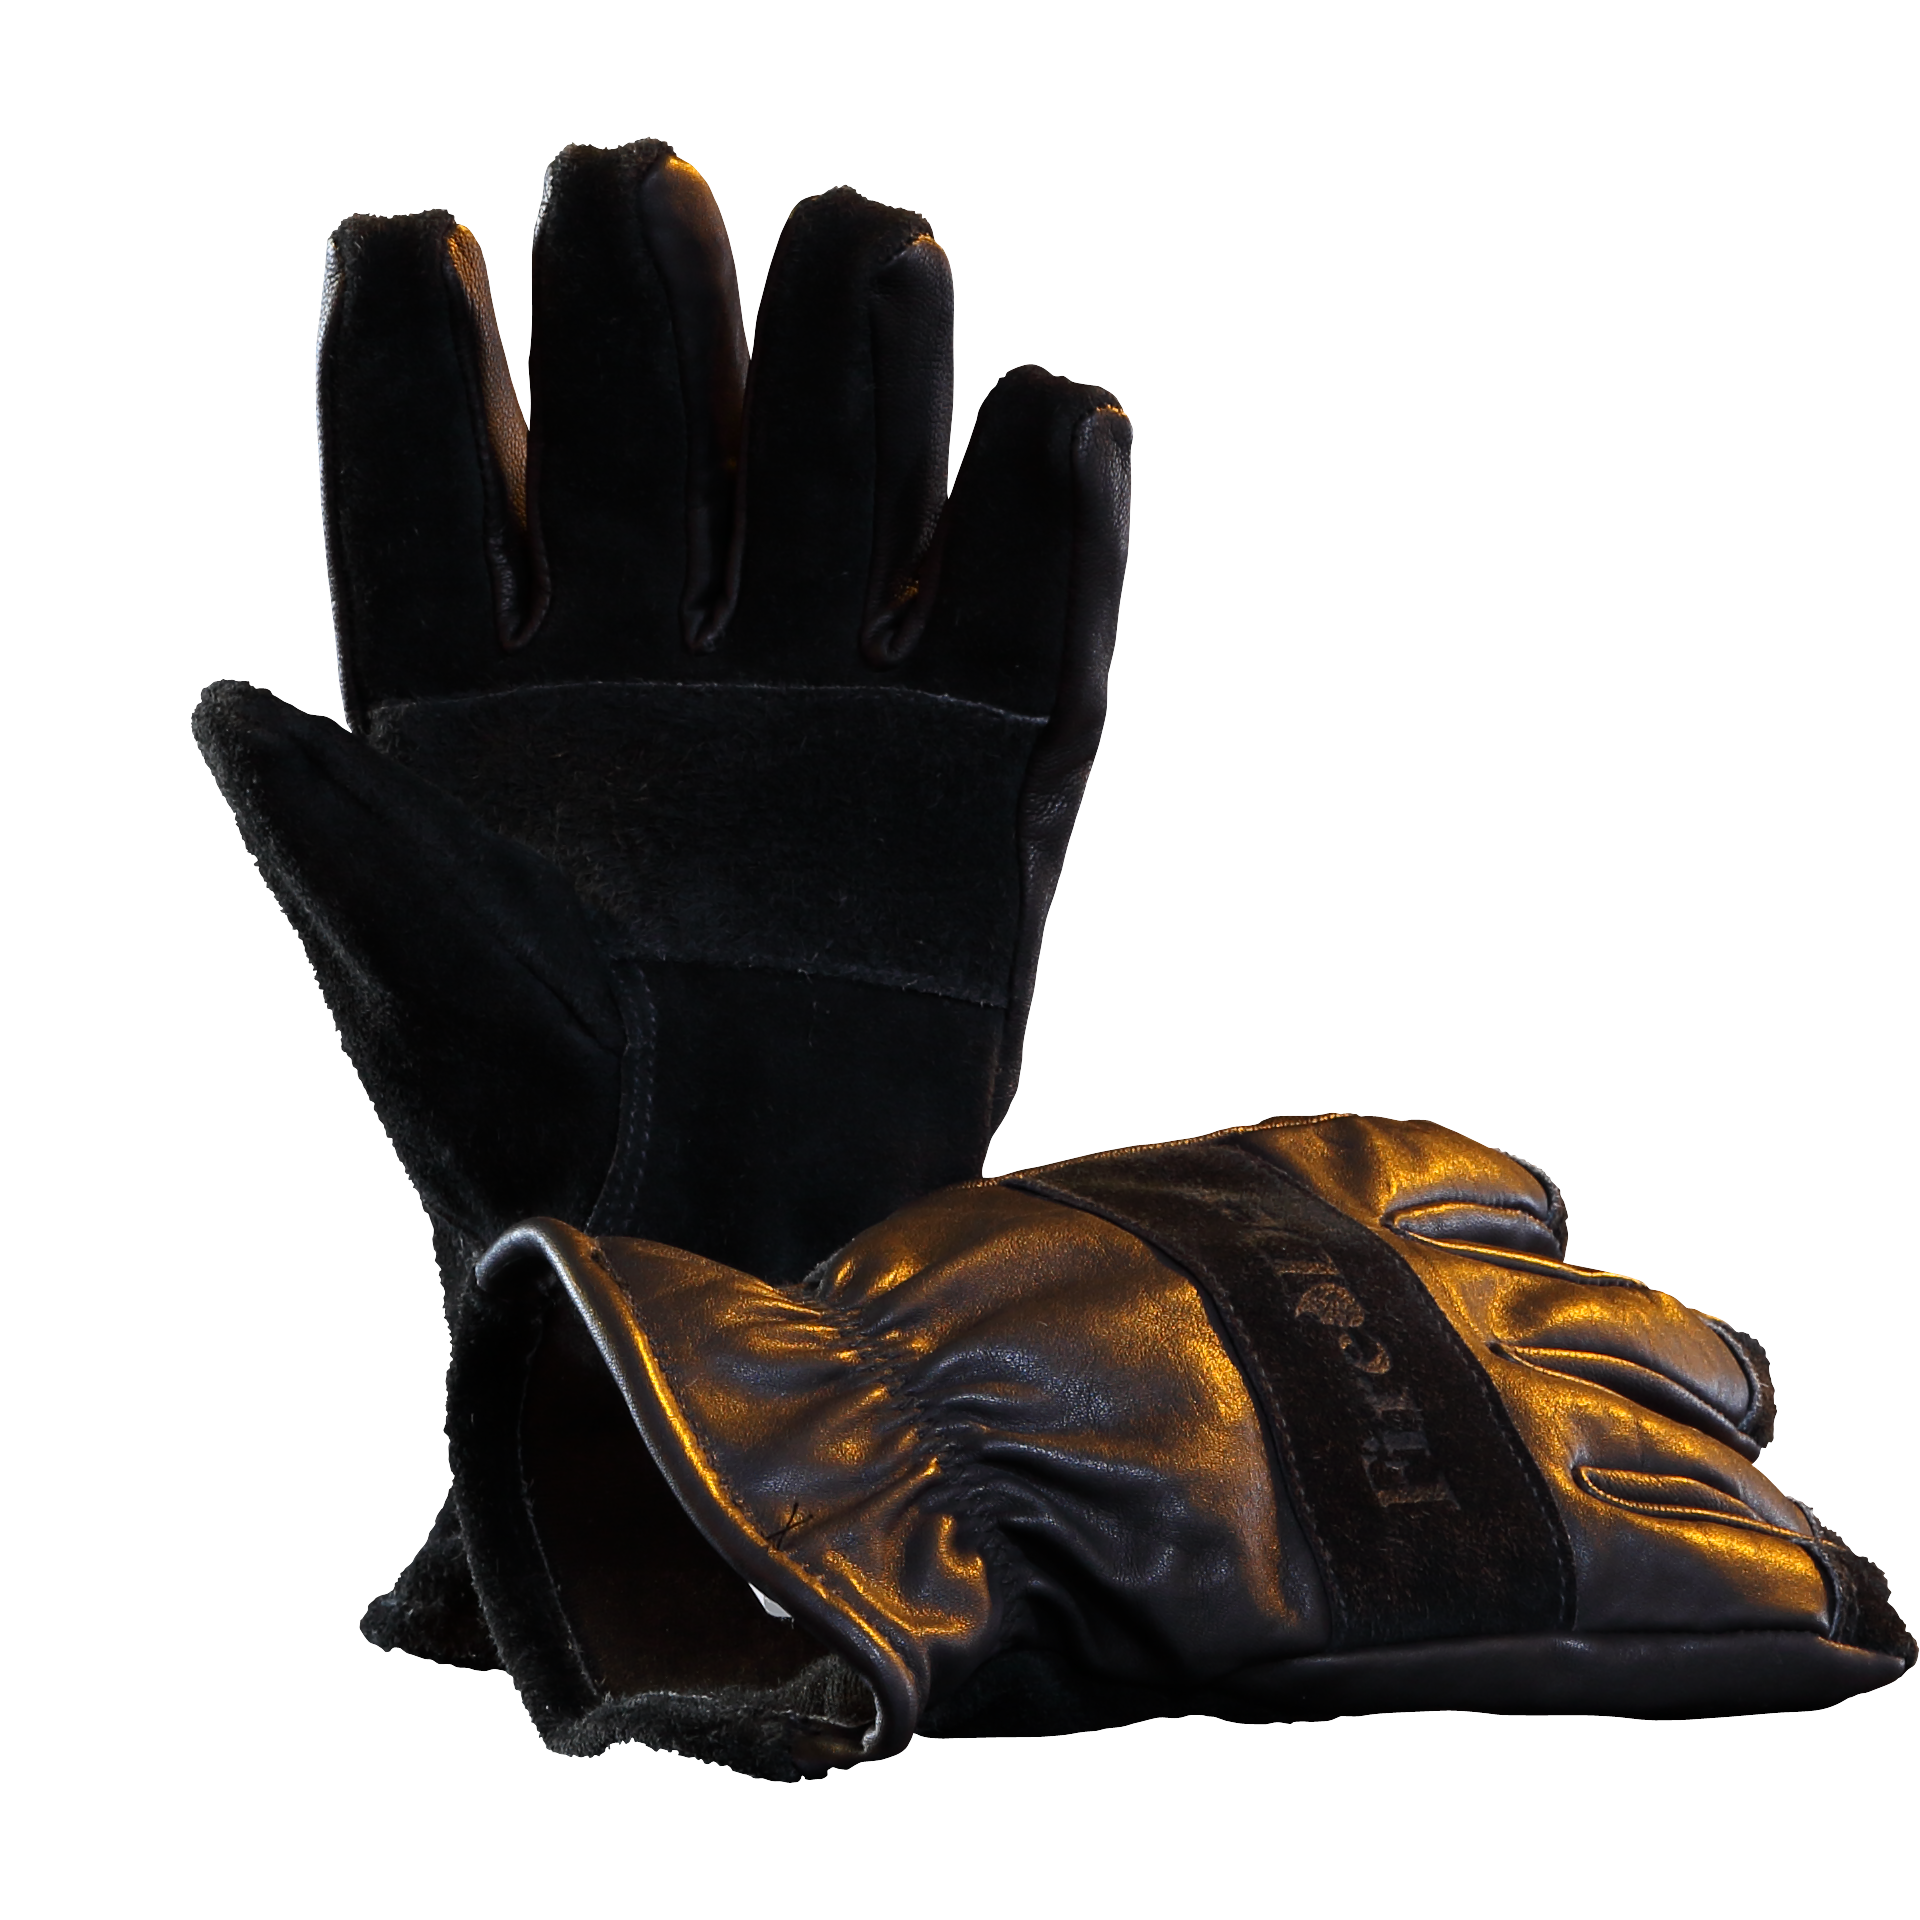 FireDex_DexPro-Glove_Mouseover_2128_1920x1920